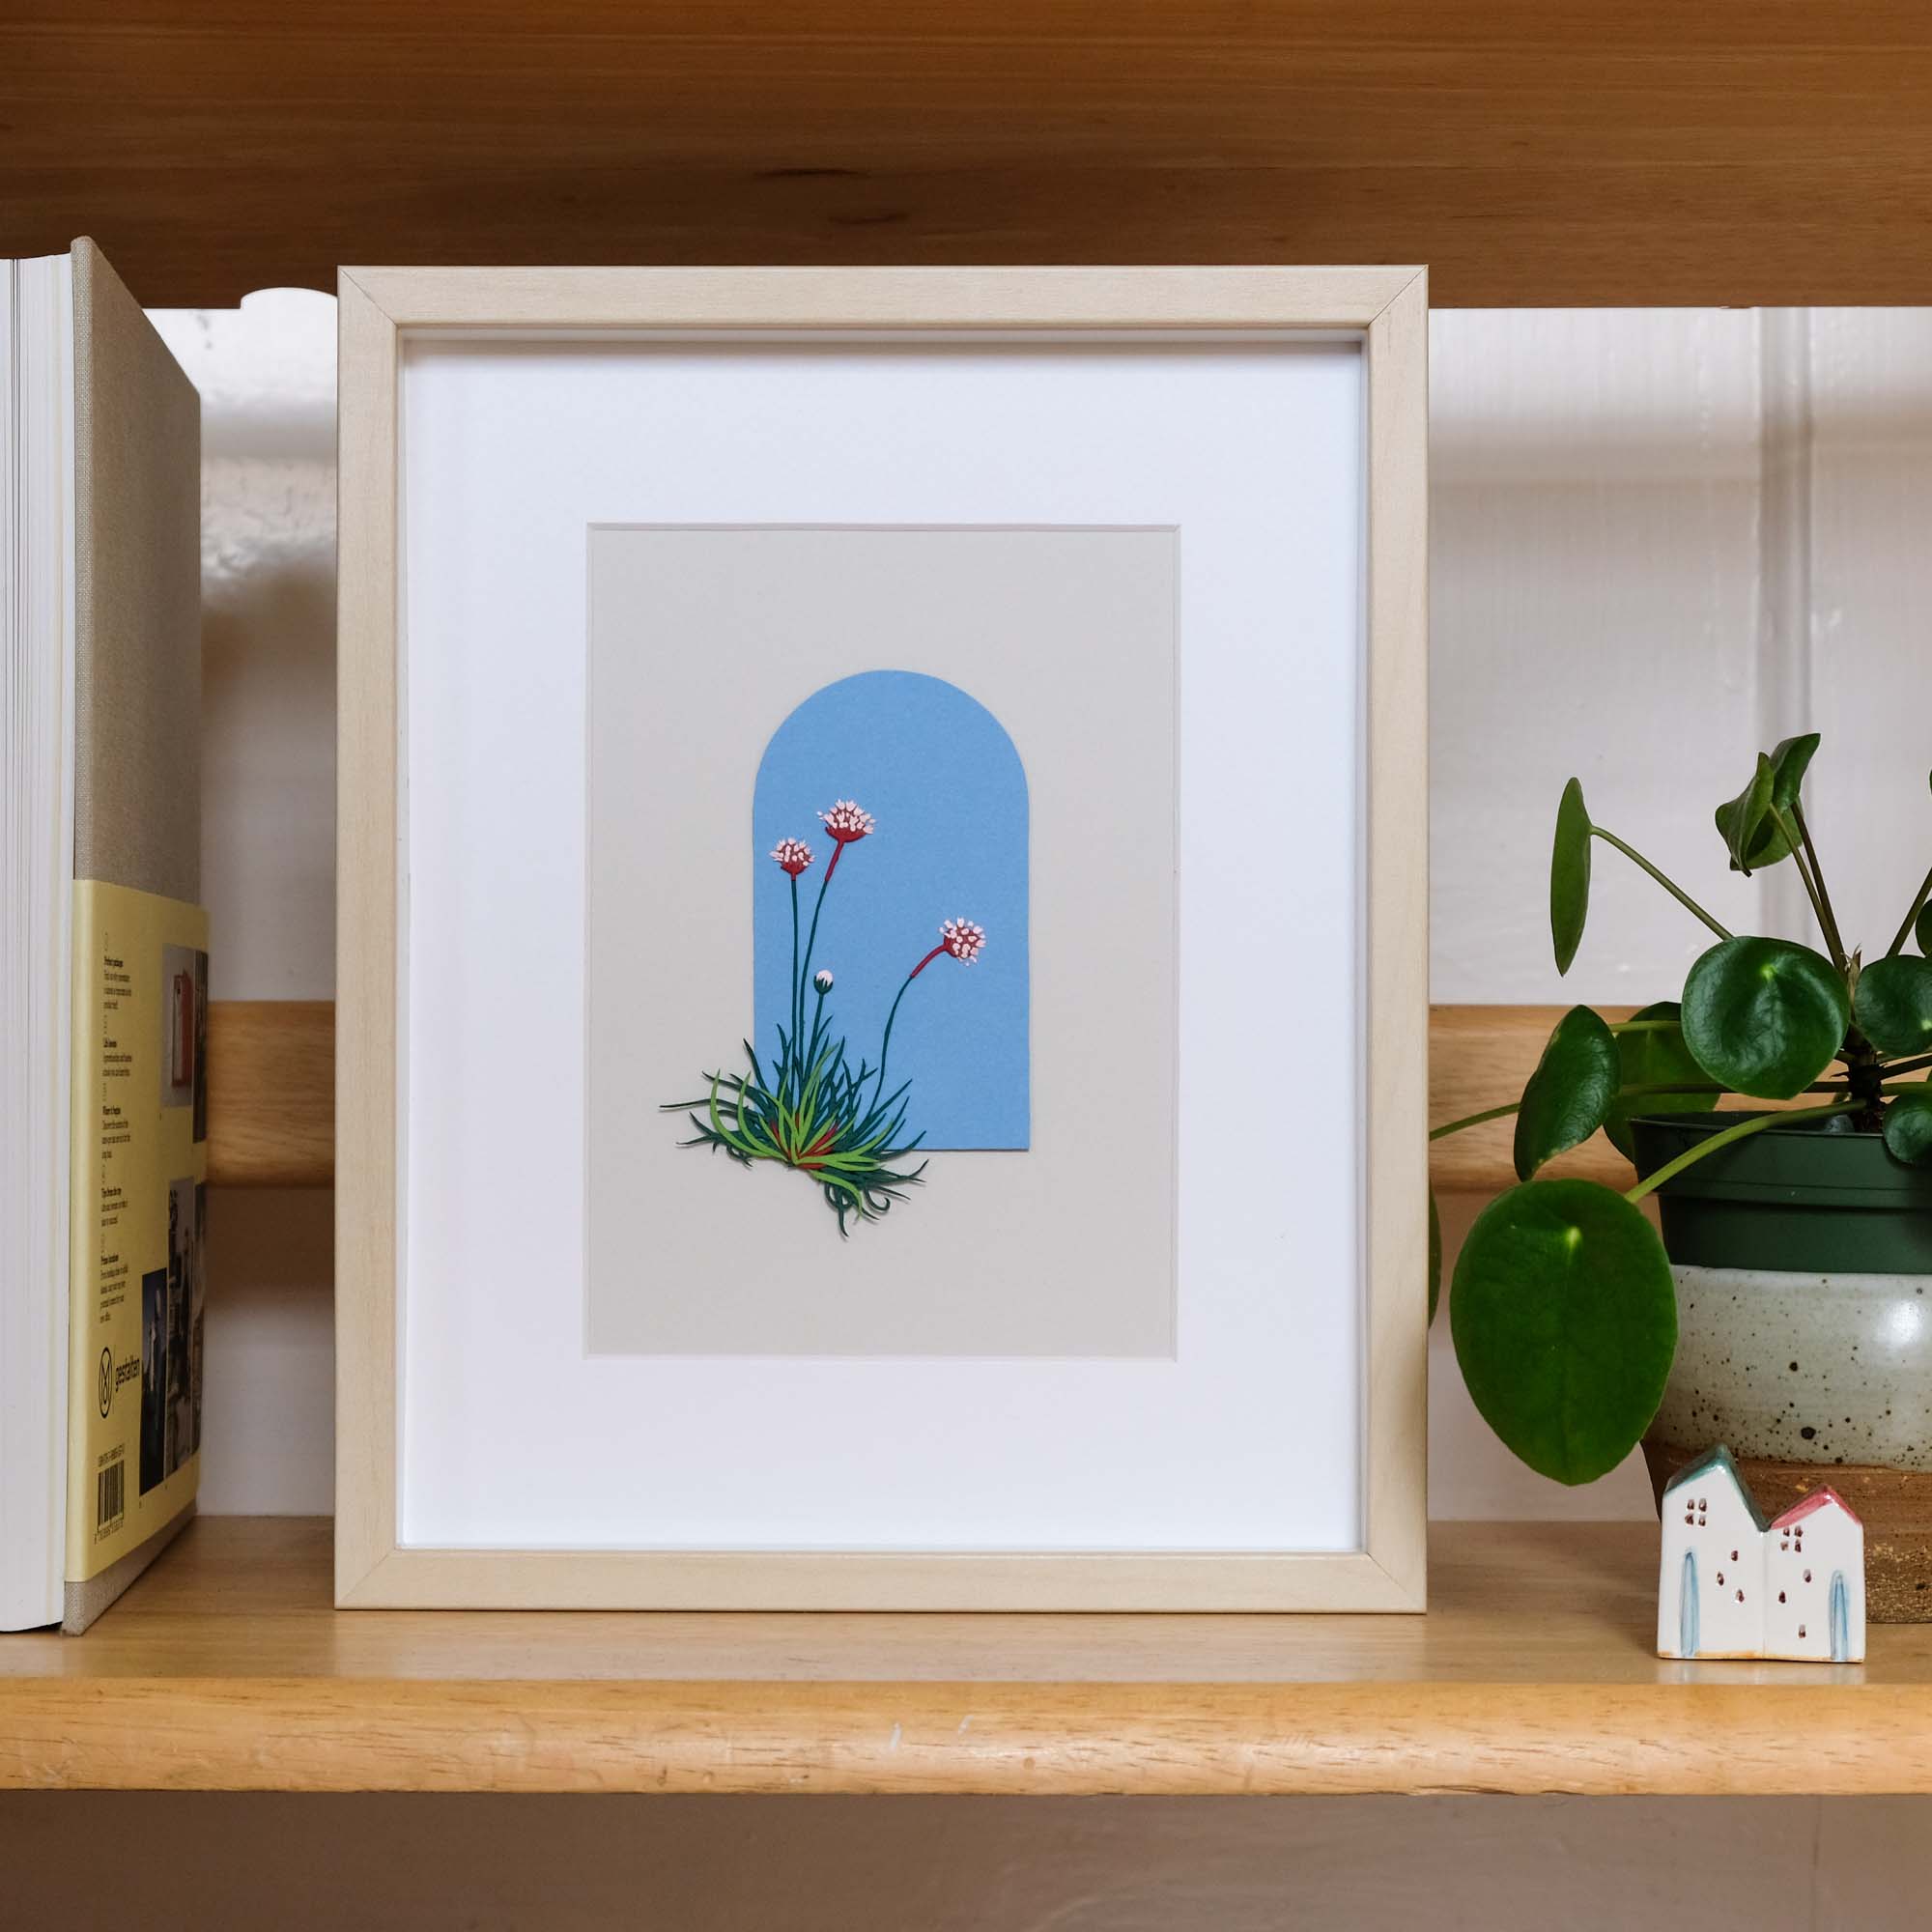 Paper sea thrift flowers sit on an arched blue background. The artwork is framed on a shelf next to a small houseplant.